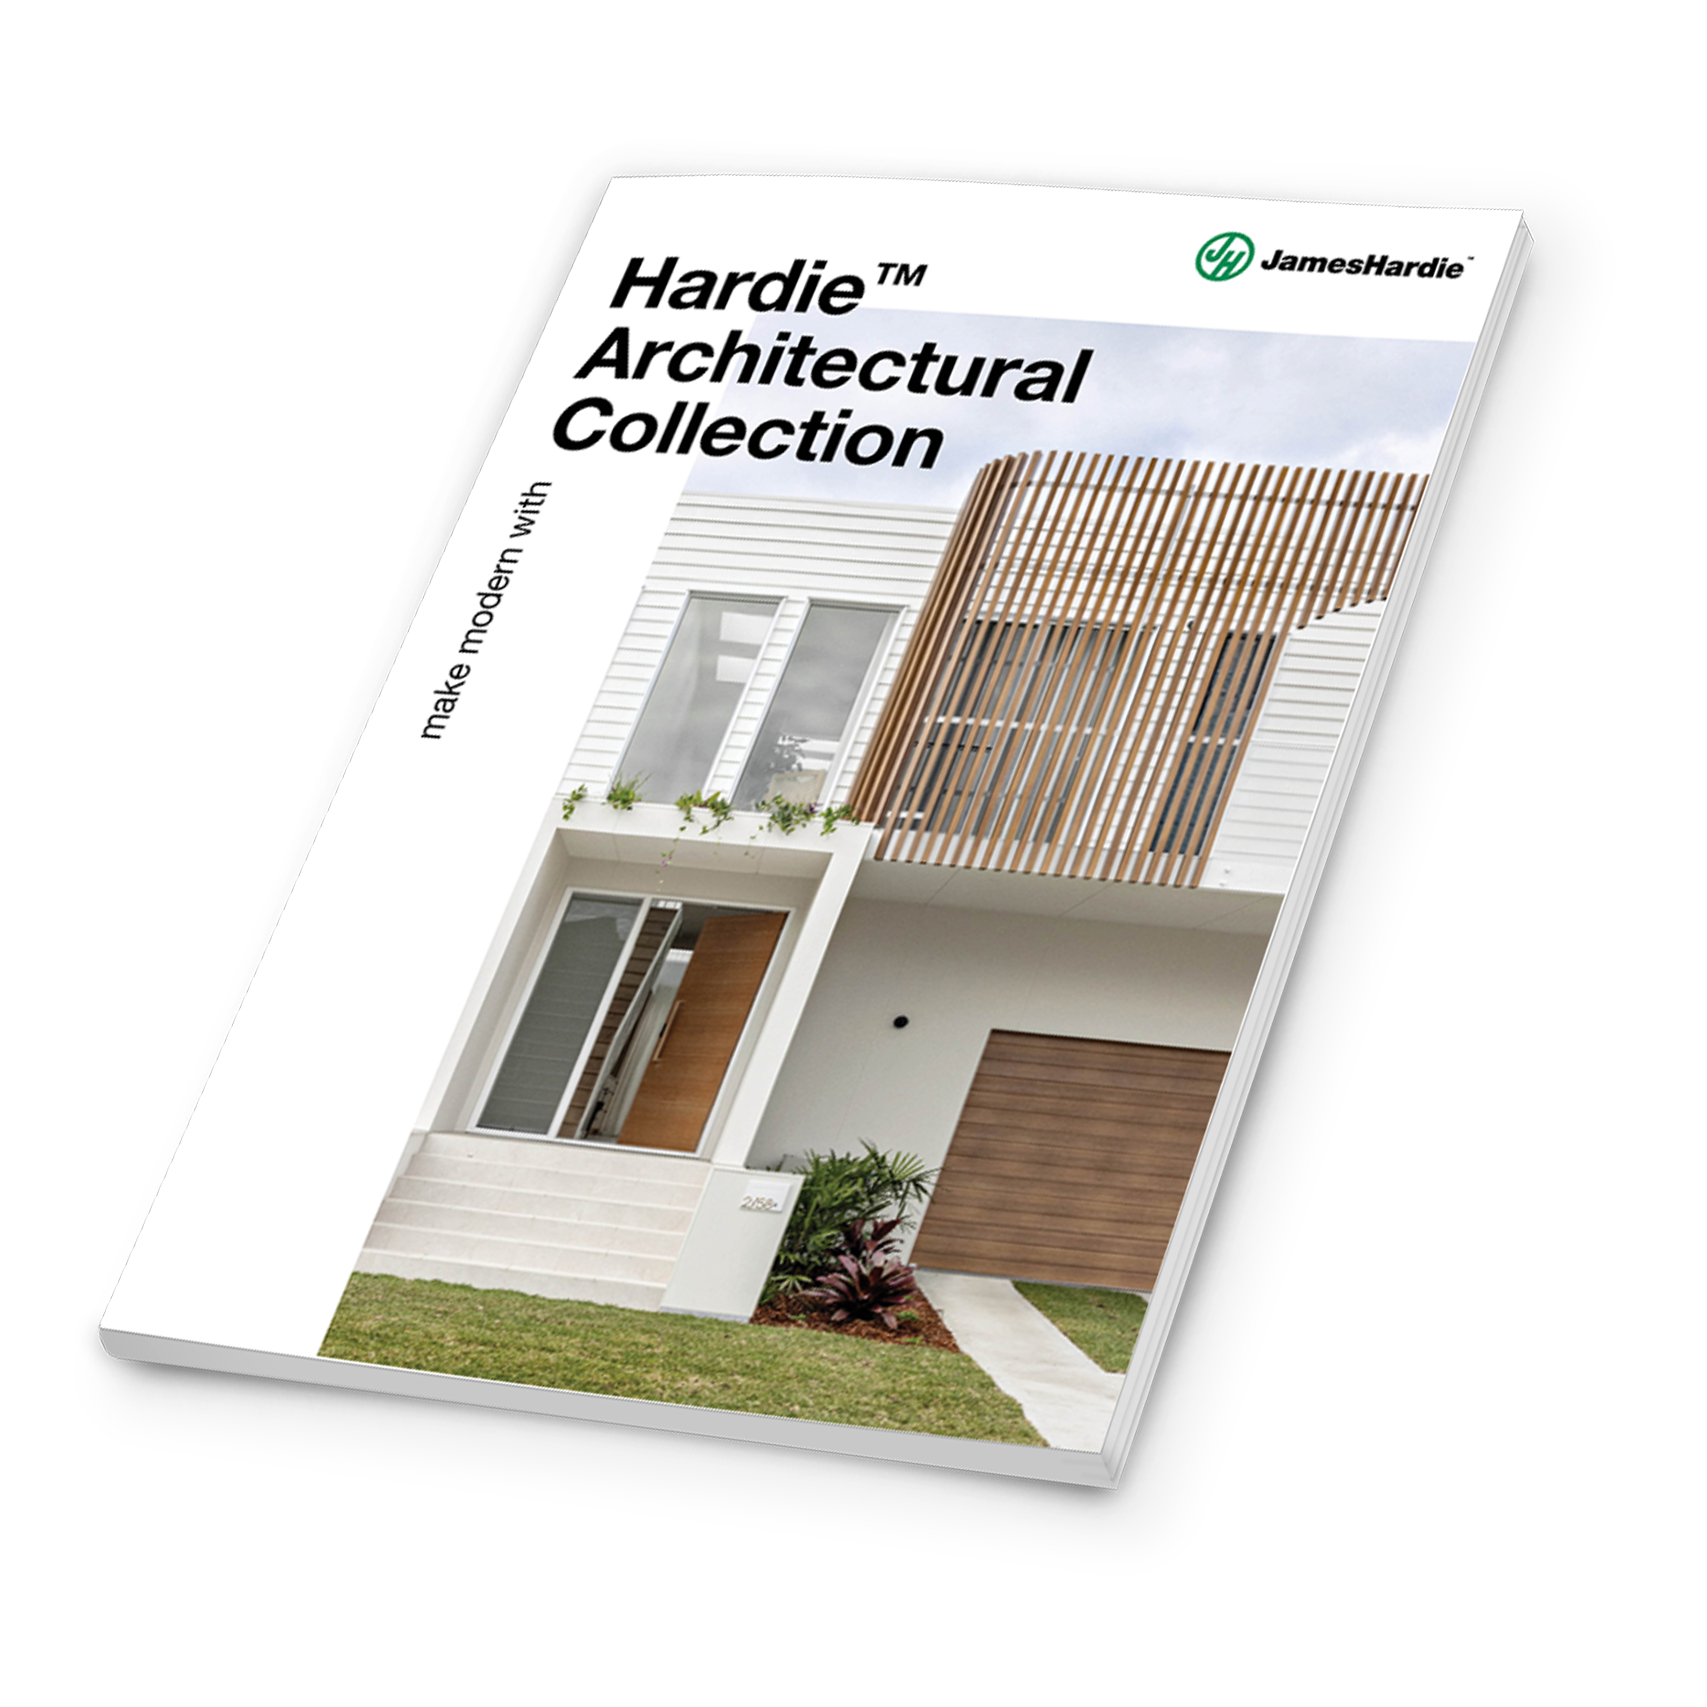 Hardie™ Architectural Collection Interactive Magazine